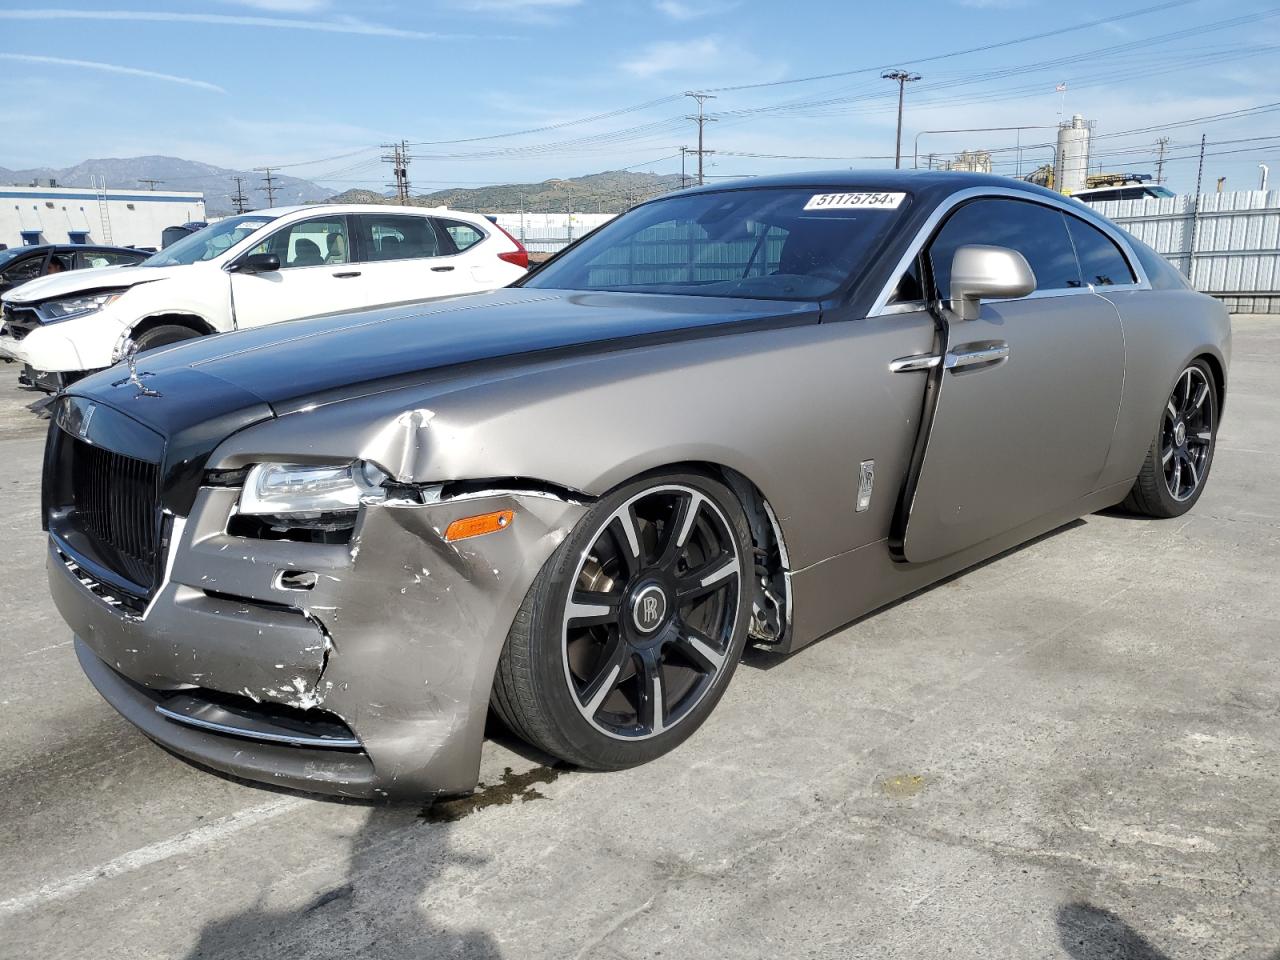 vin: SCA665C59EUX84490 SCA665C59EUX84490 2014 rolls-royce wraith 6600 for Sale in 91352 3922, Ca - Sun Valley, Sun Valley, California, USA